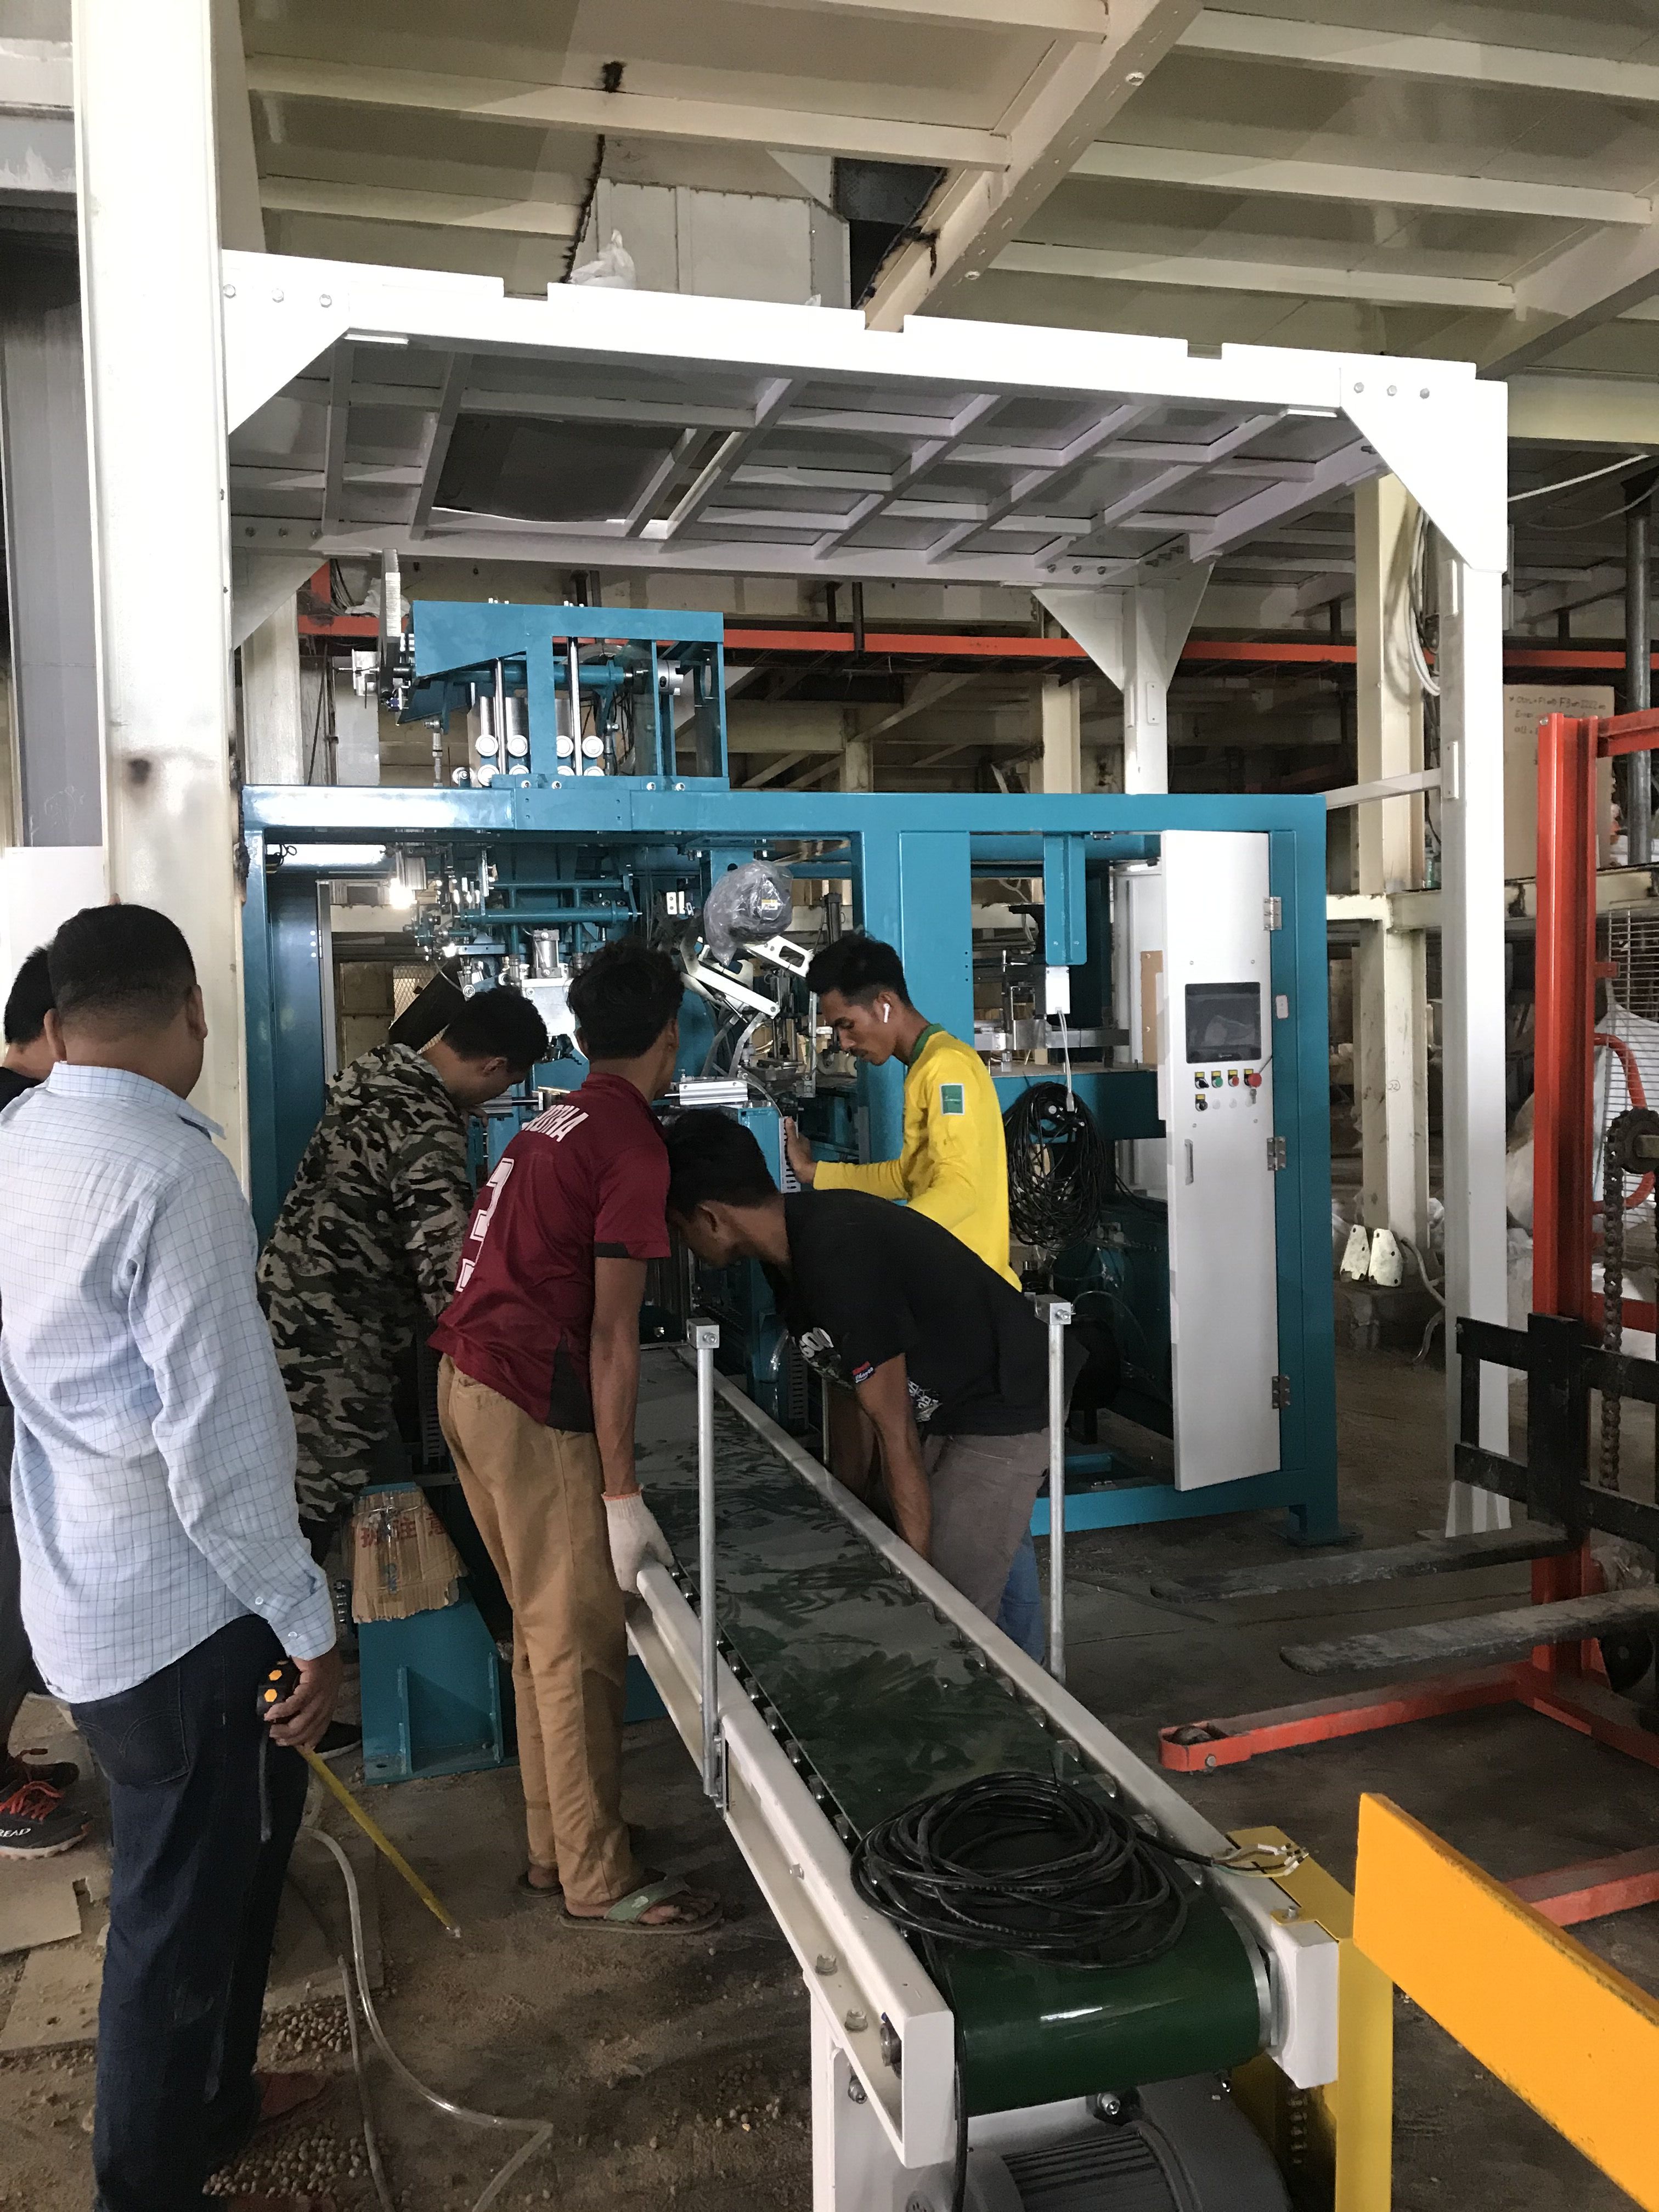 Horticulture Fertilizer bagging machine Automated Bagging Line Fully Automatic Packing Palletizing Line, Fully Automatic Packing Line, Fully Automatic Bagging Line, Fully Automatic filling and packagi